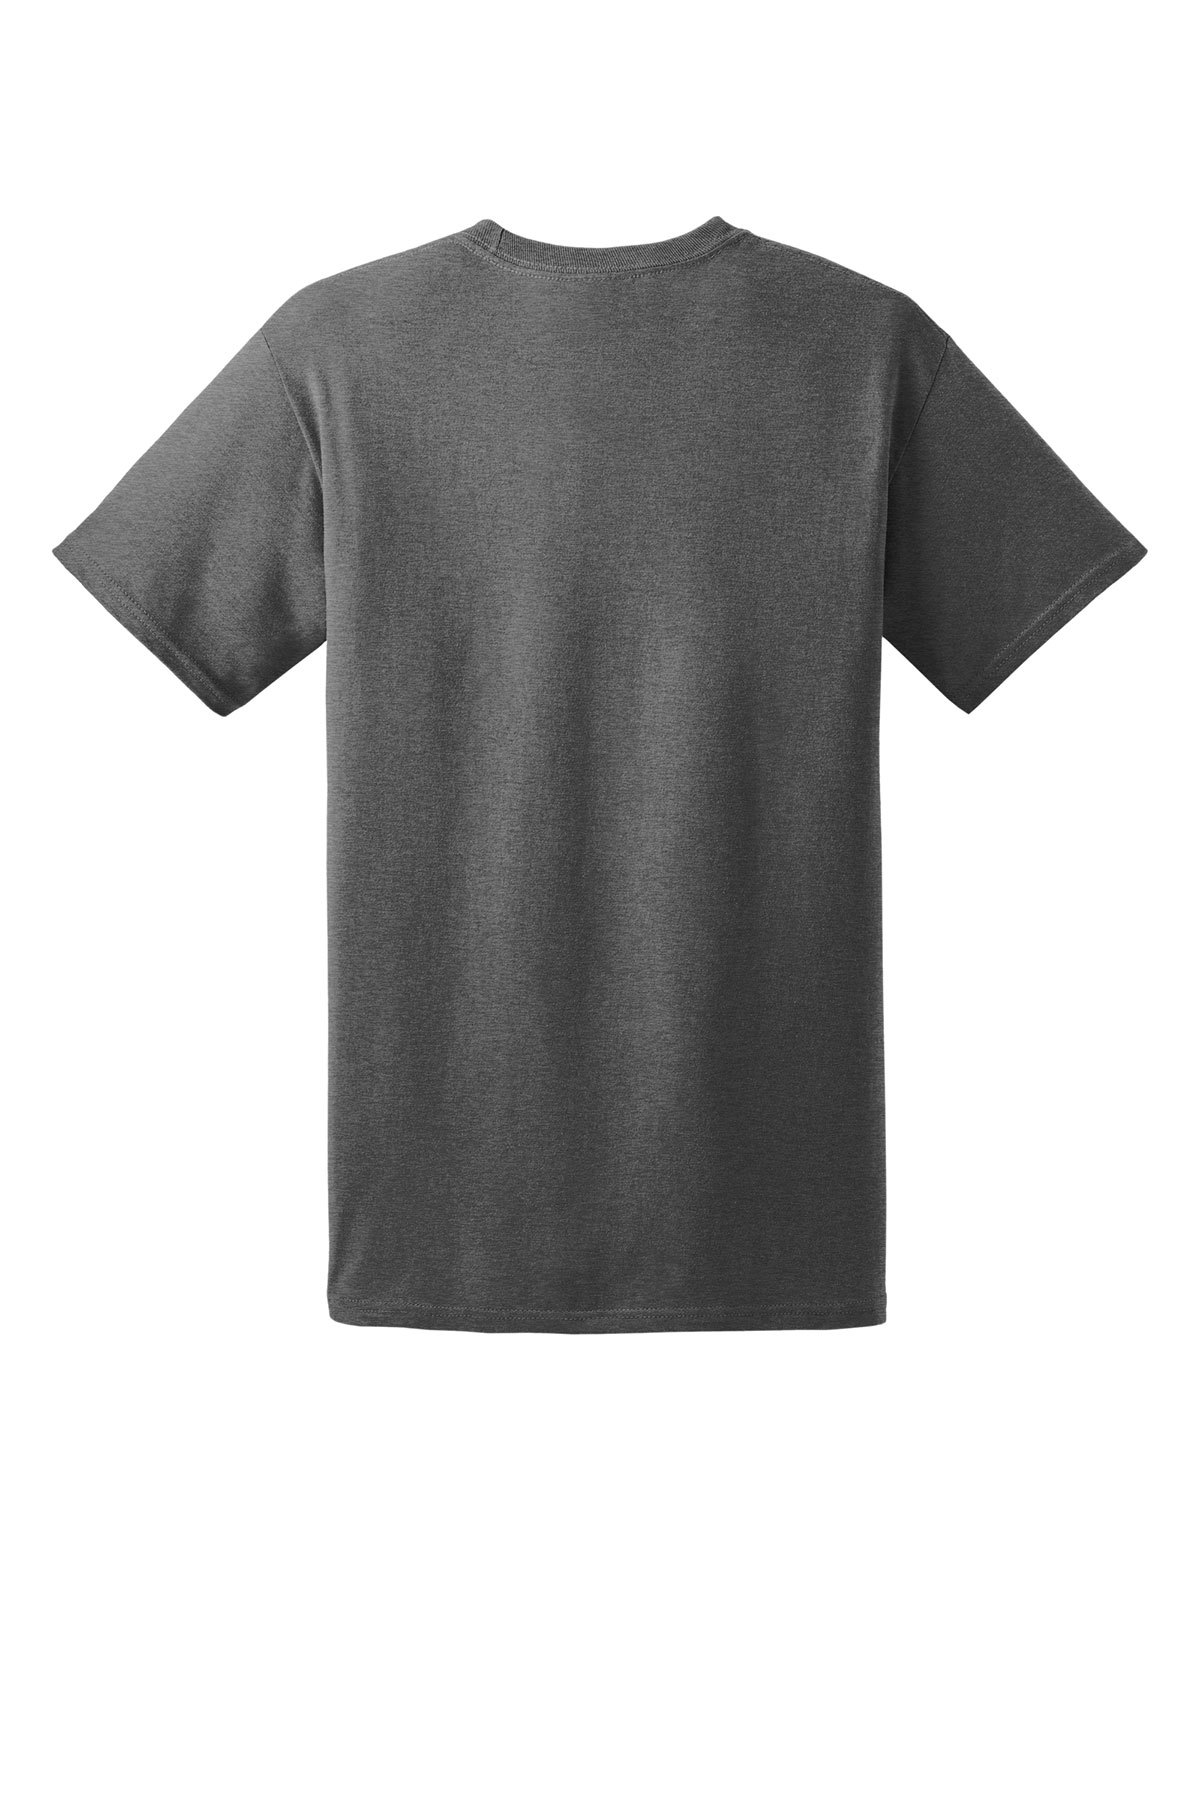 Hanes - EcoSmart 50/50 Cotton/Poly T-Shirt | Product | Company Casuals